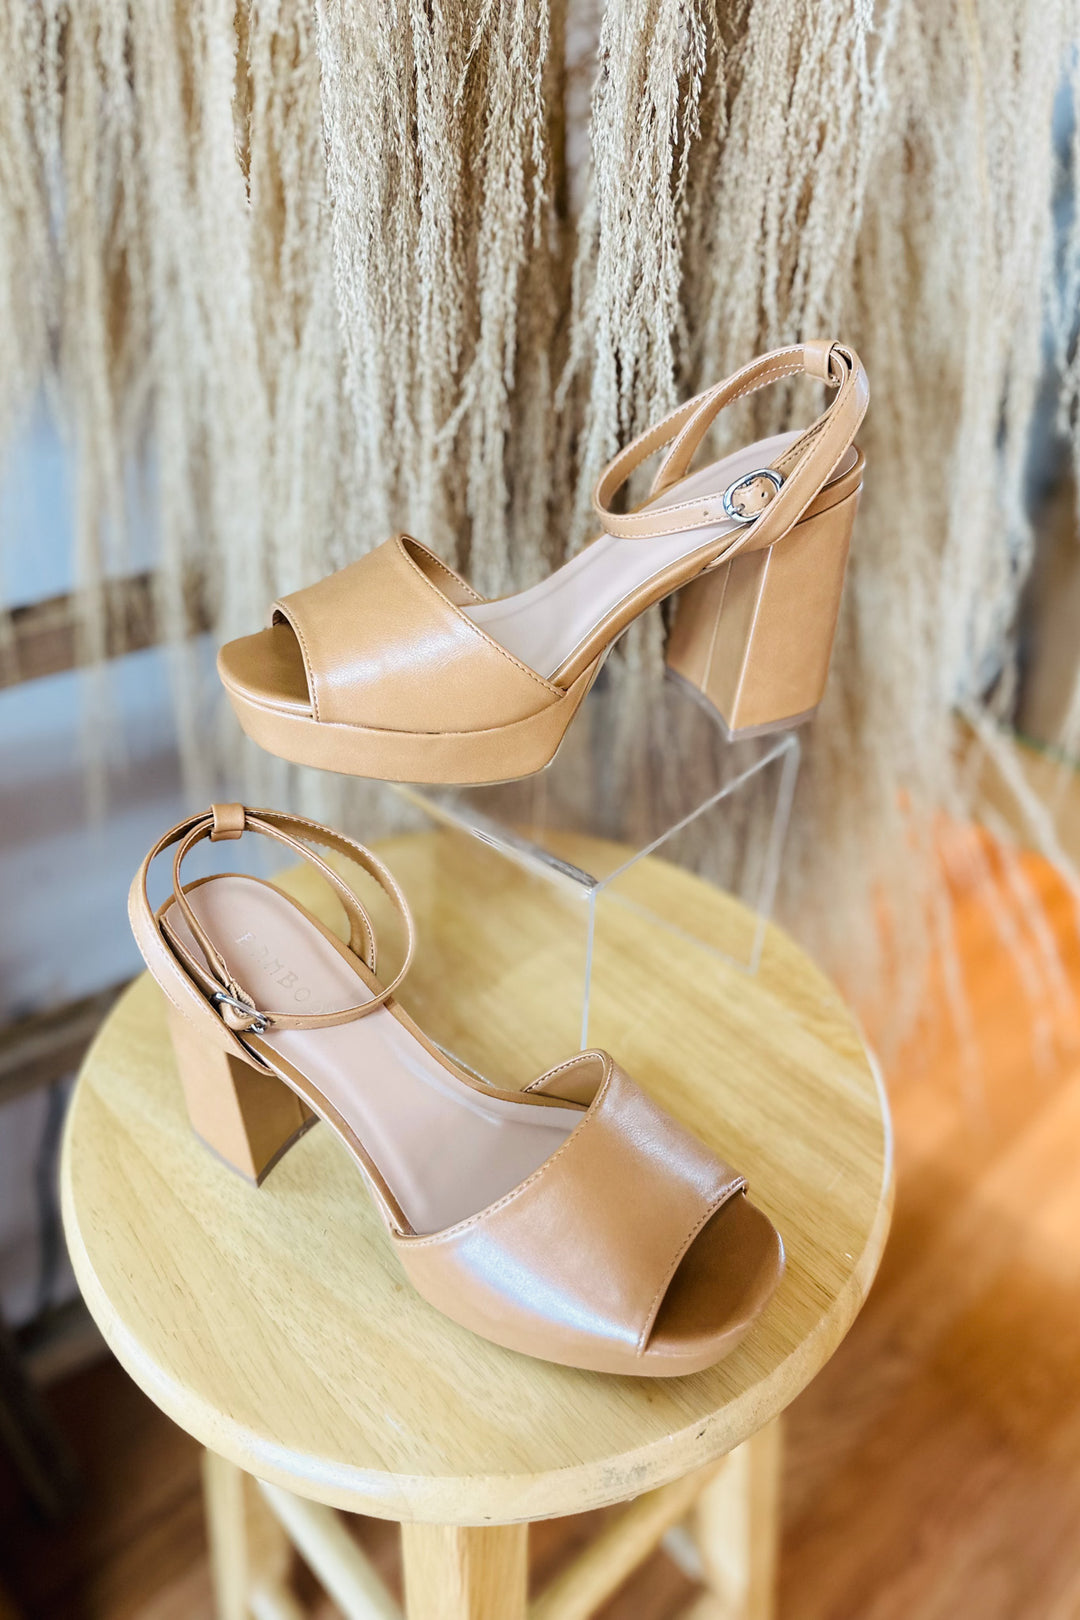 Step Up Heels in Tan - Shop Spoiled Boutique 